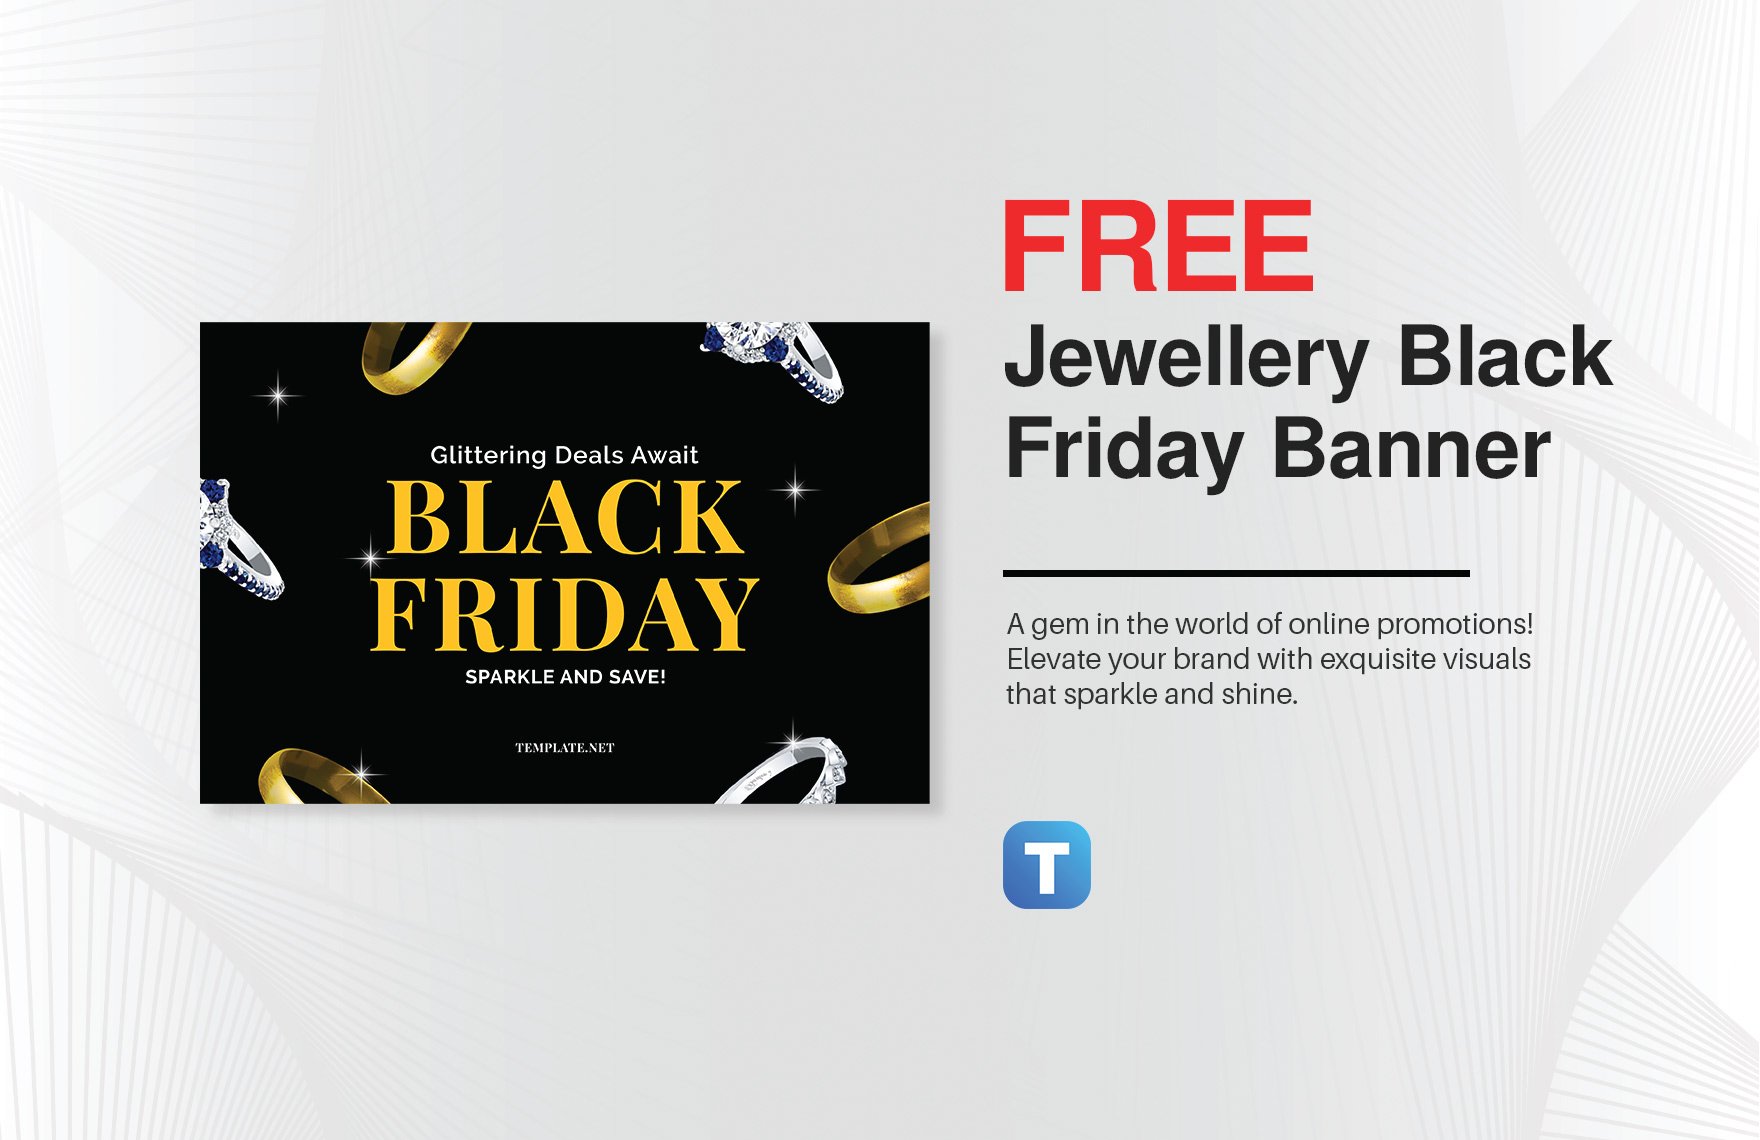 Free Jewellery Black Friday Banner Template